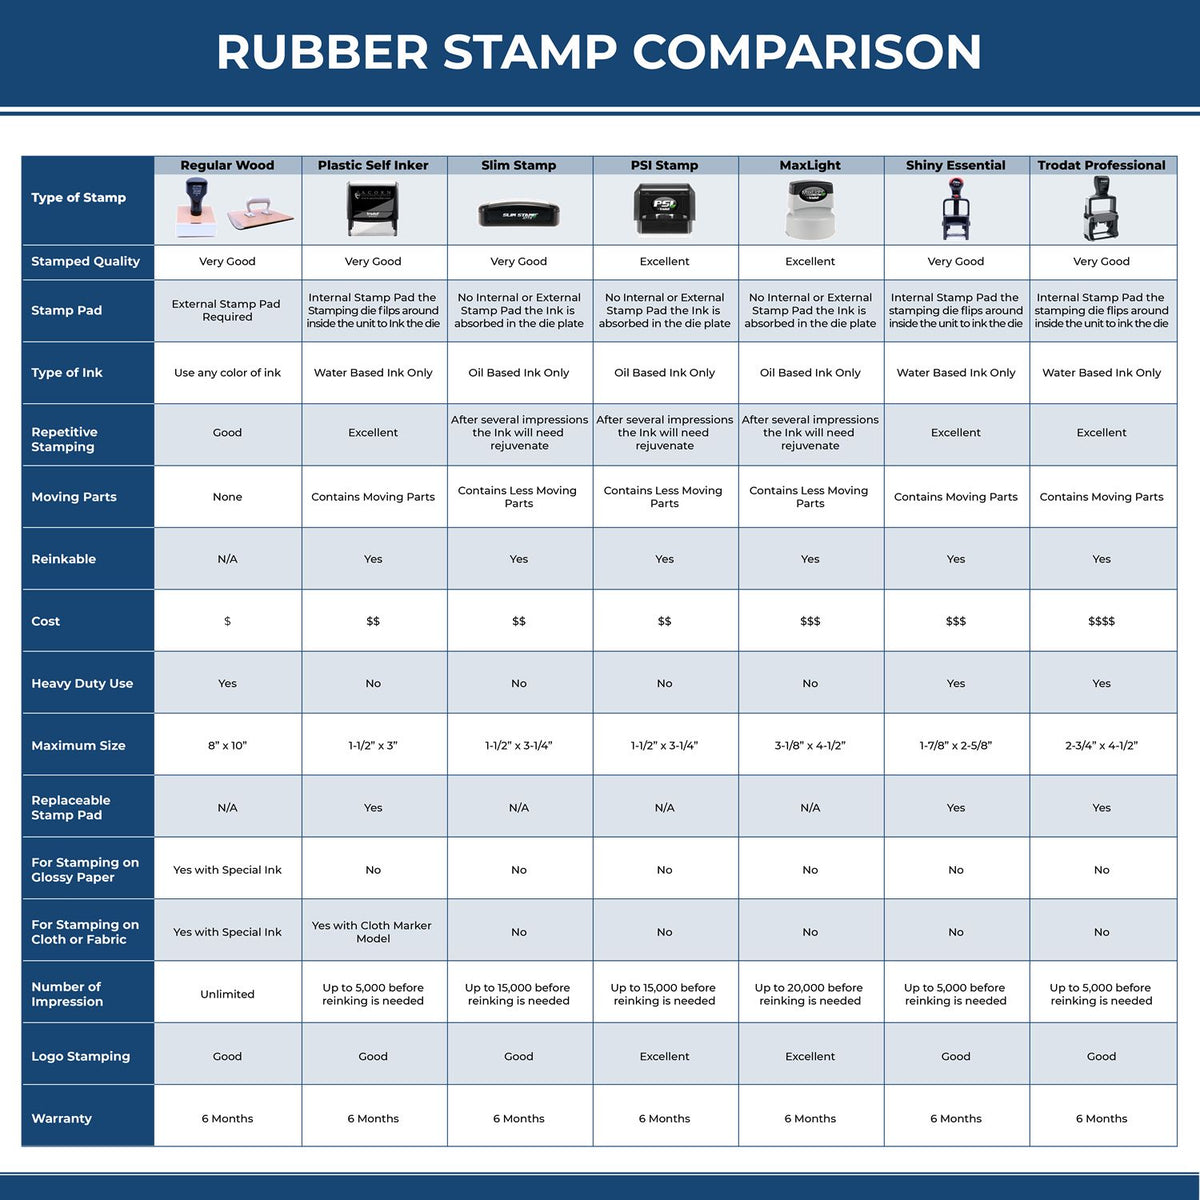 Large Self Inking Paid Stamp 4140S Rubber Stamp Comparison